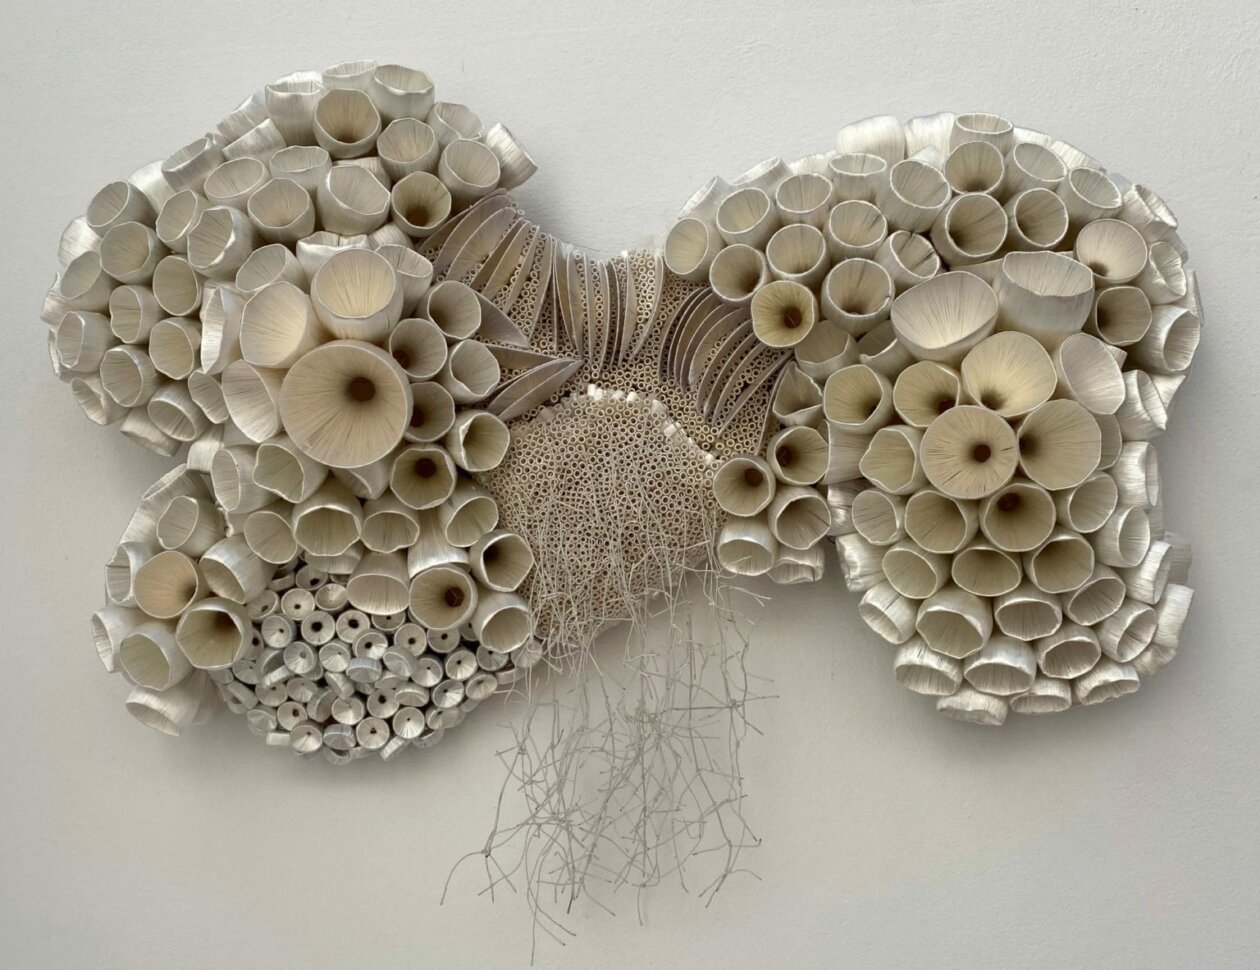 Coral Reefs, Cells, And Human Organs Made Out Of Plastic Bottle Caps And Embroideries By Ghizlane Sahli (7)